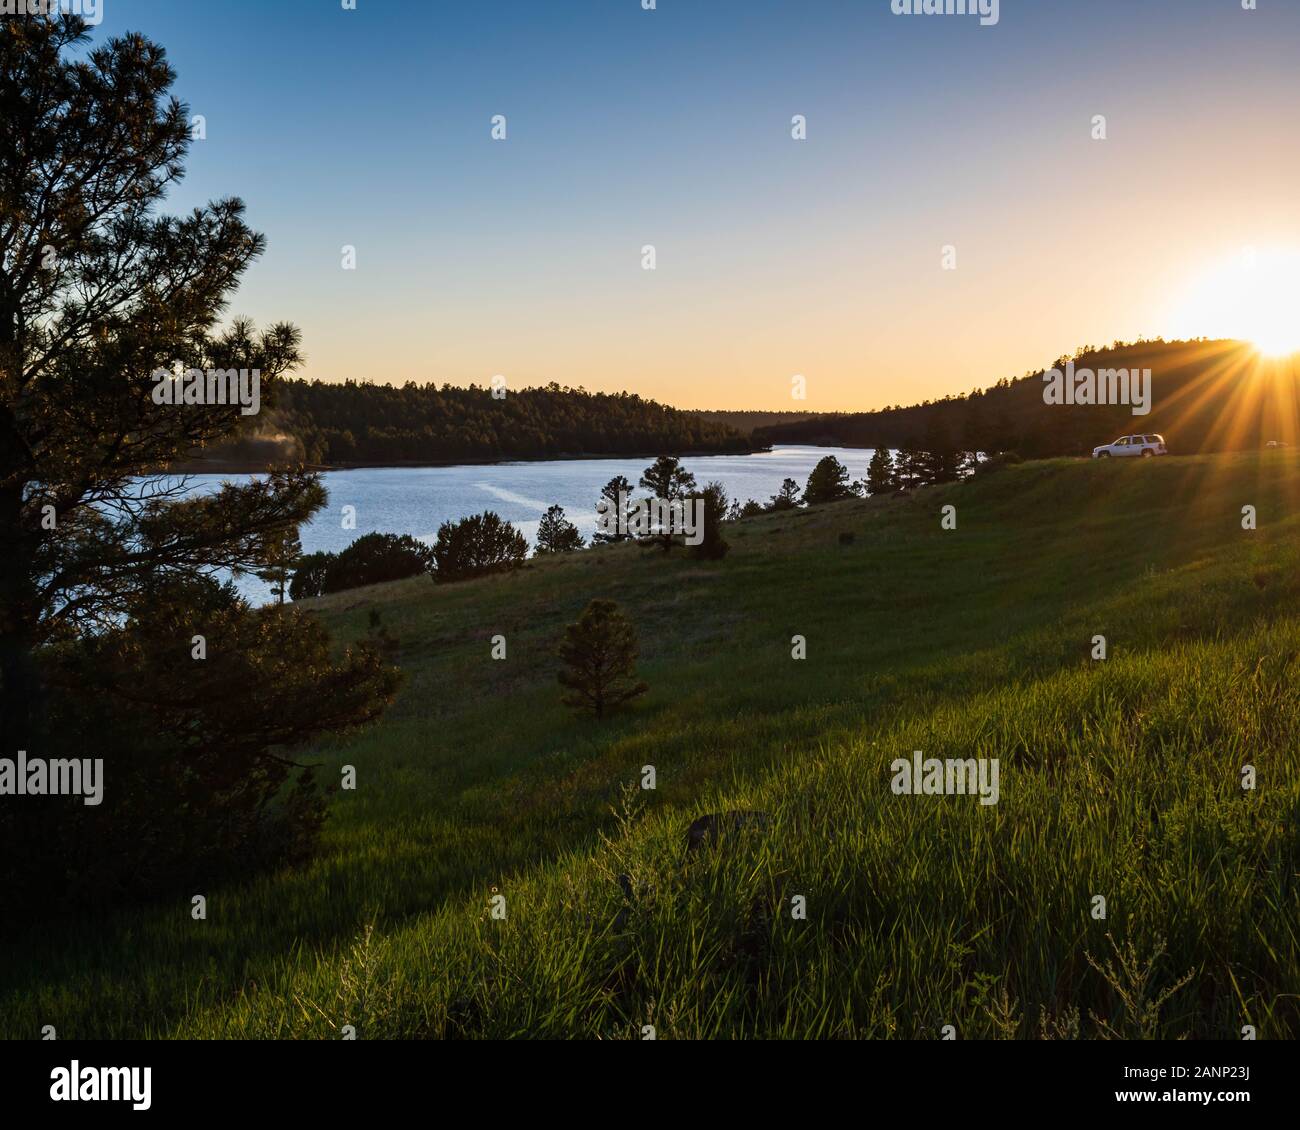 Lake Mary in Flagstaff, Arizona, with blue water during sunset. Golden highlights paint the pine trees. Fresh green grass lead to a parked white SUV. Stock Photo